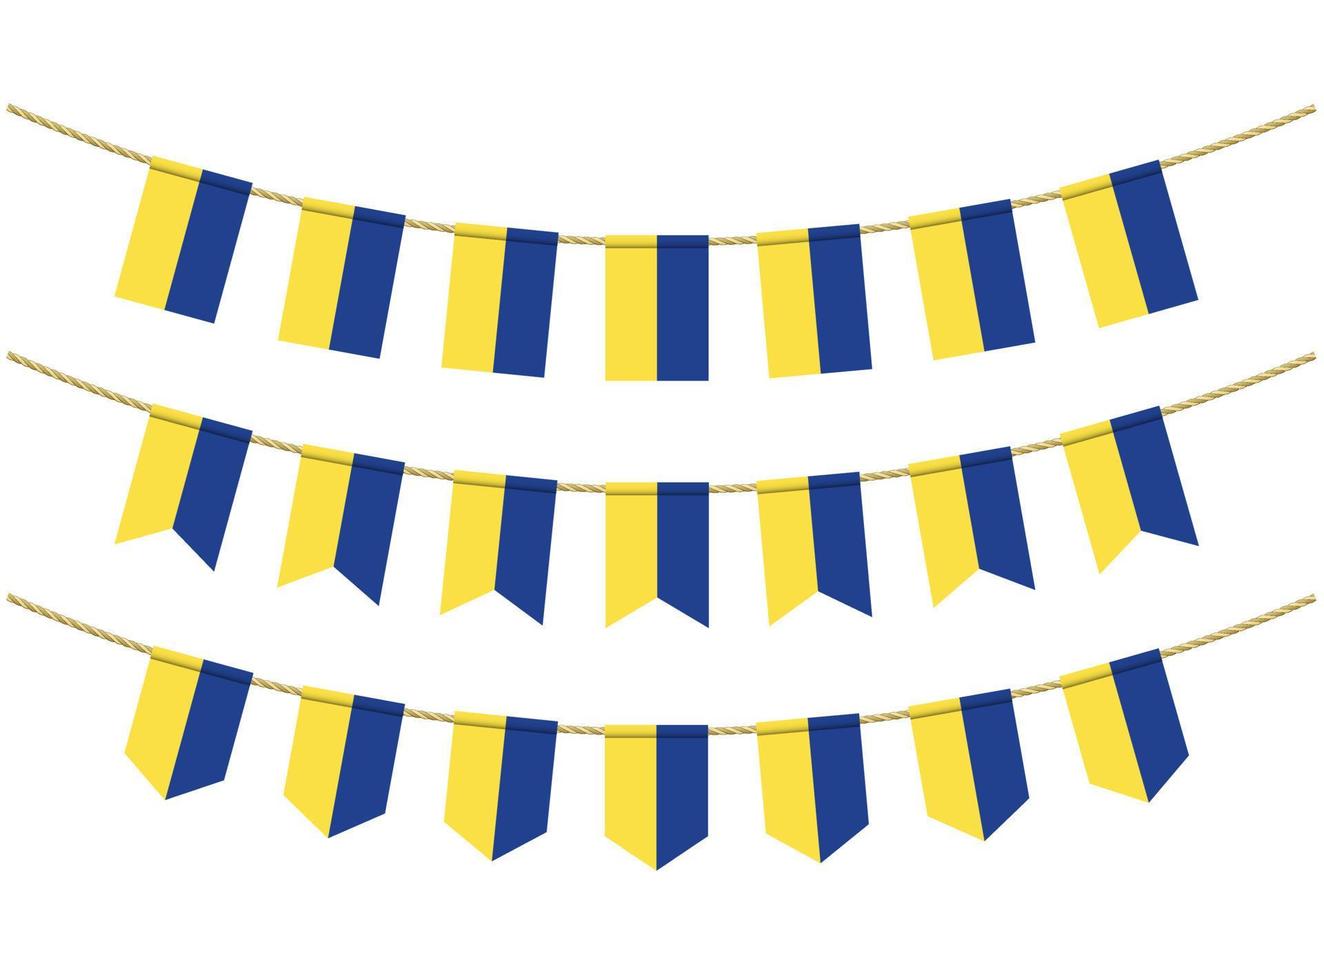 Ukraine flag on the ropes on white background. Set of Patriotic bunting flags. Bunting decoration of Ukraine flag vector